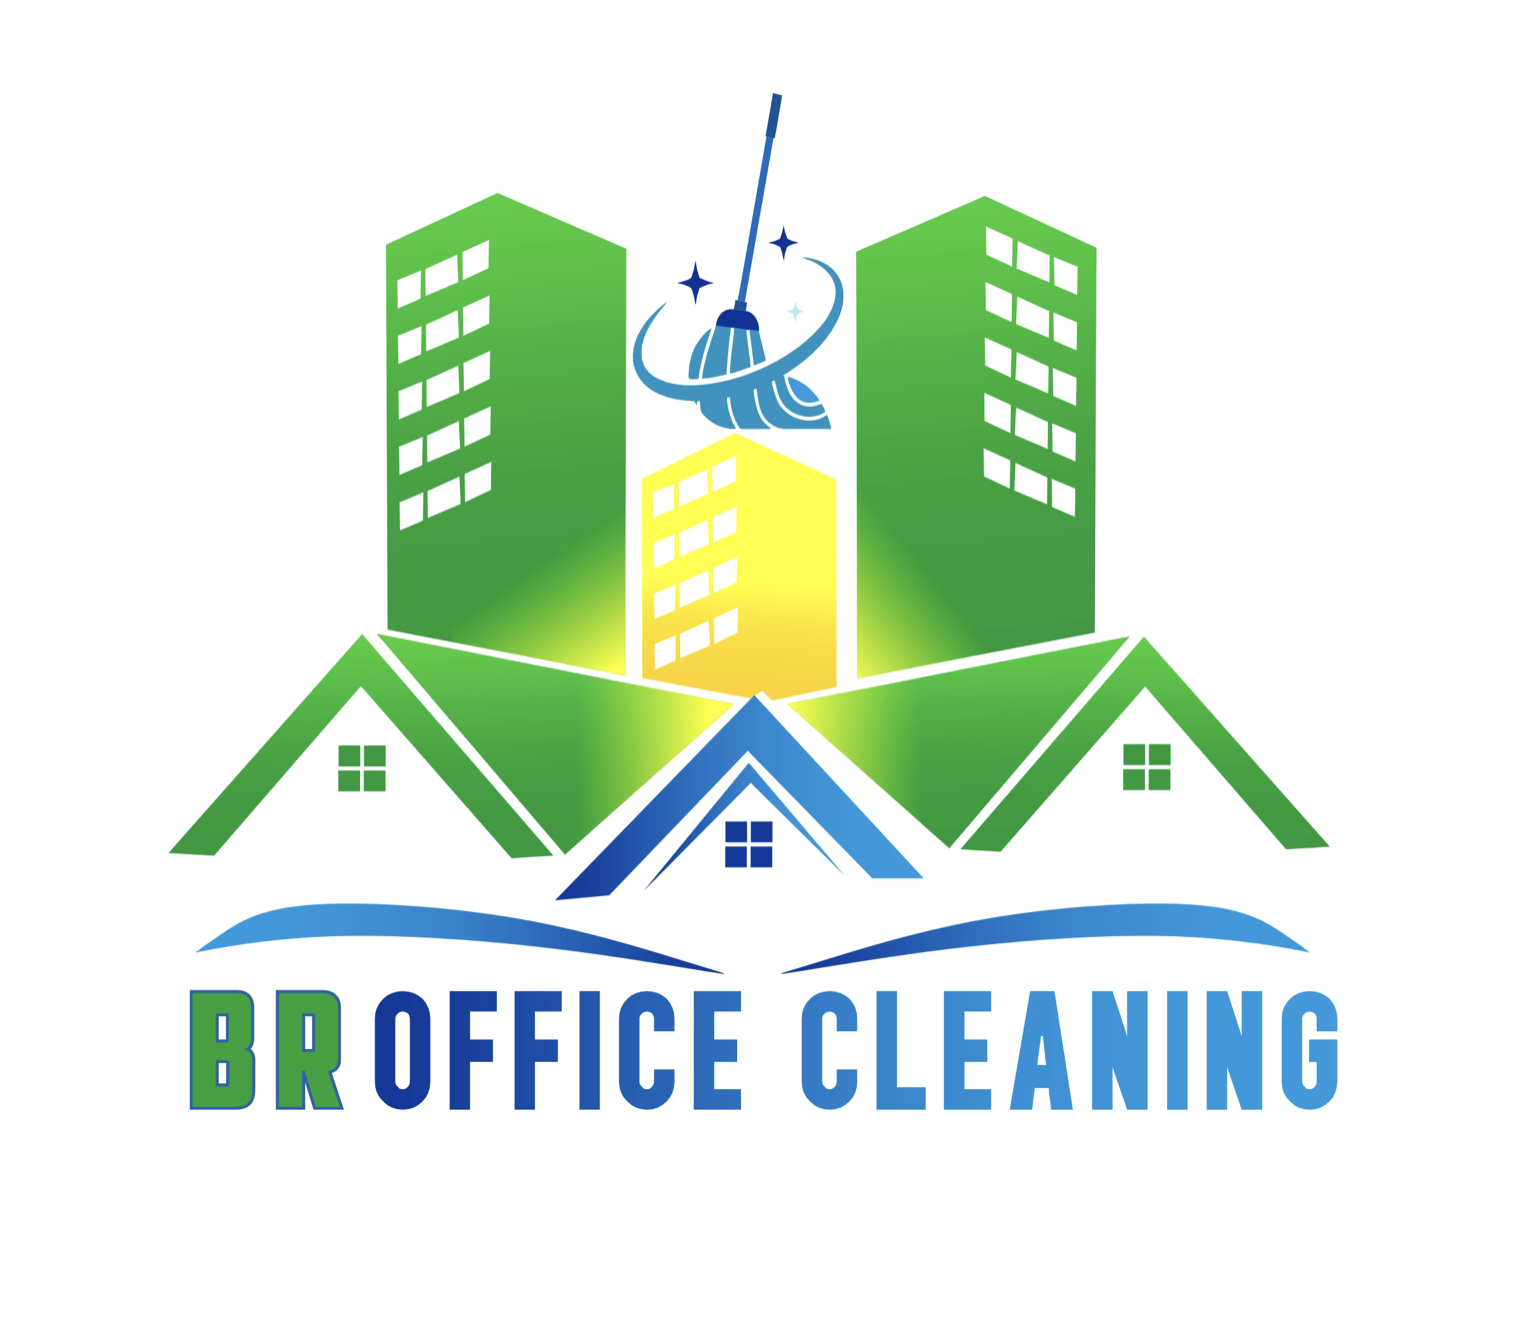 BR Office Cleaning Logo